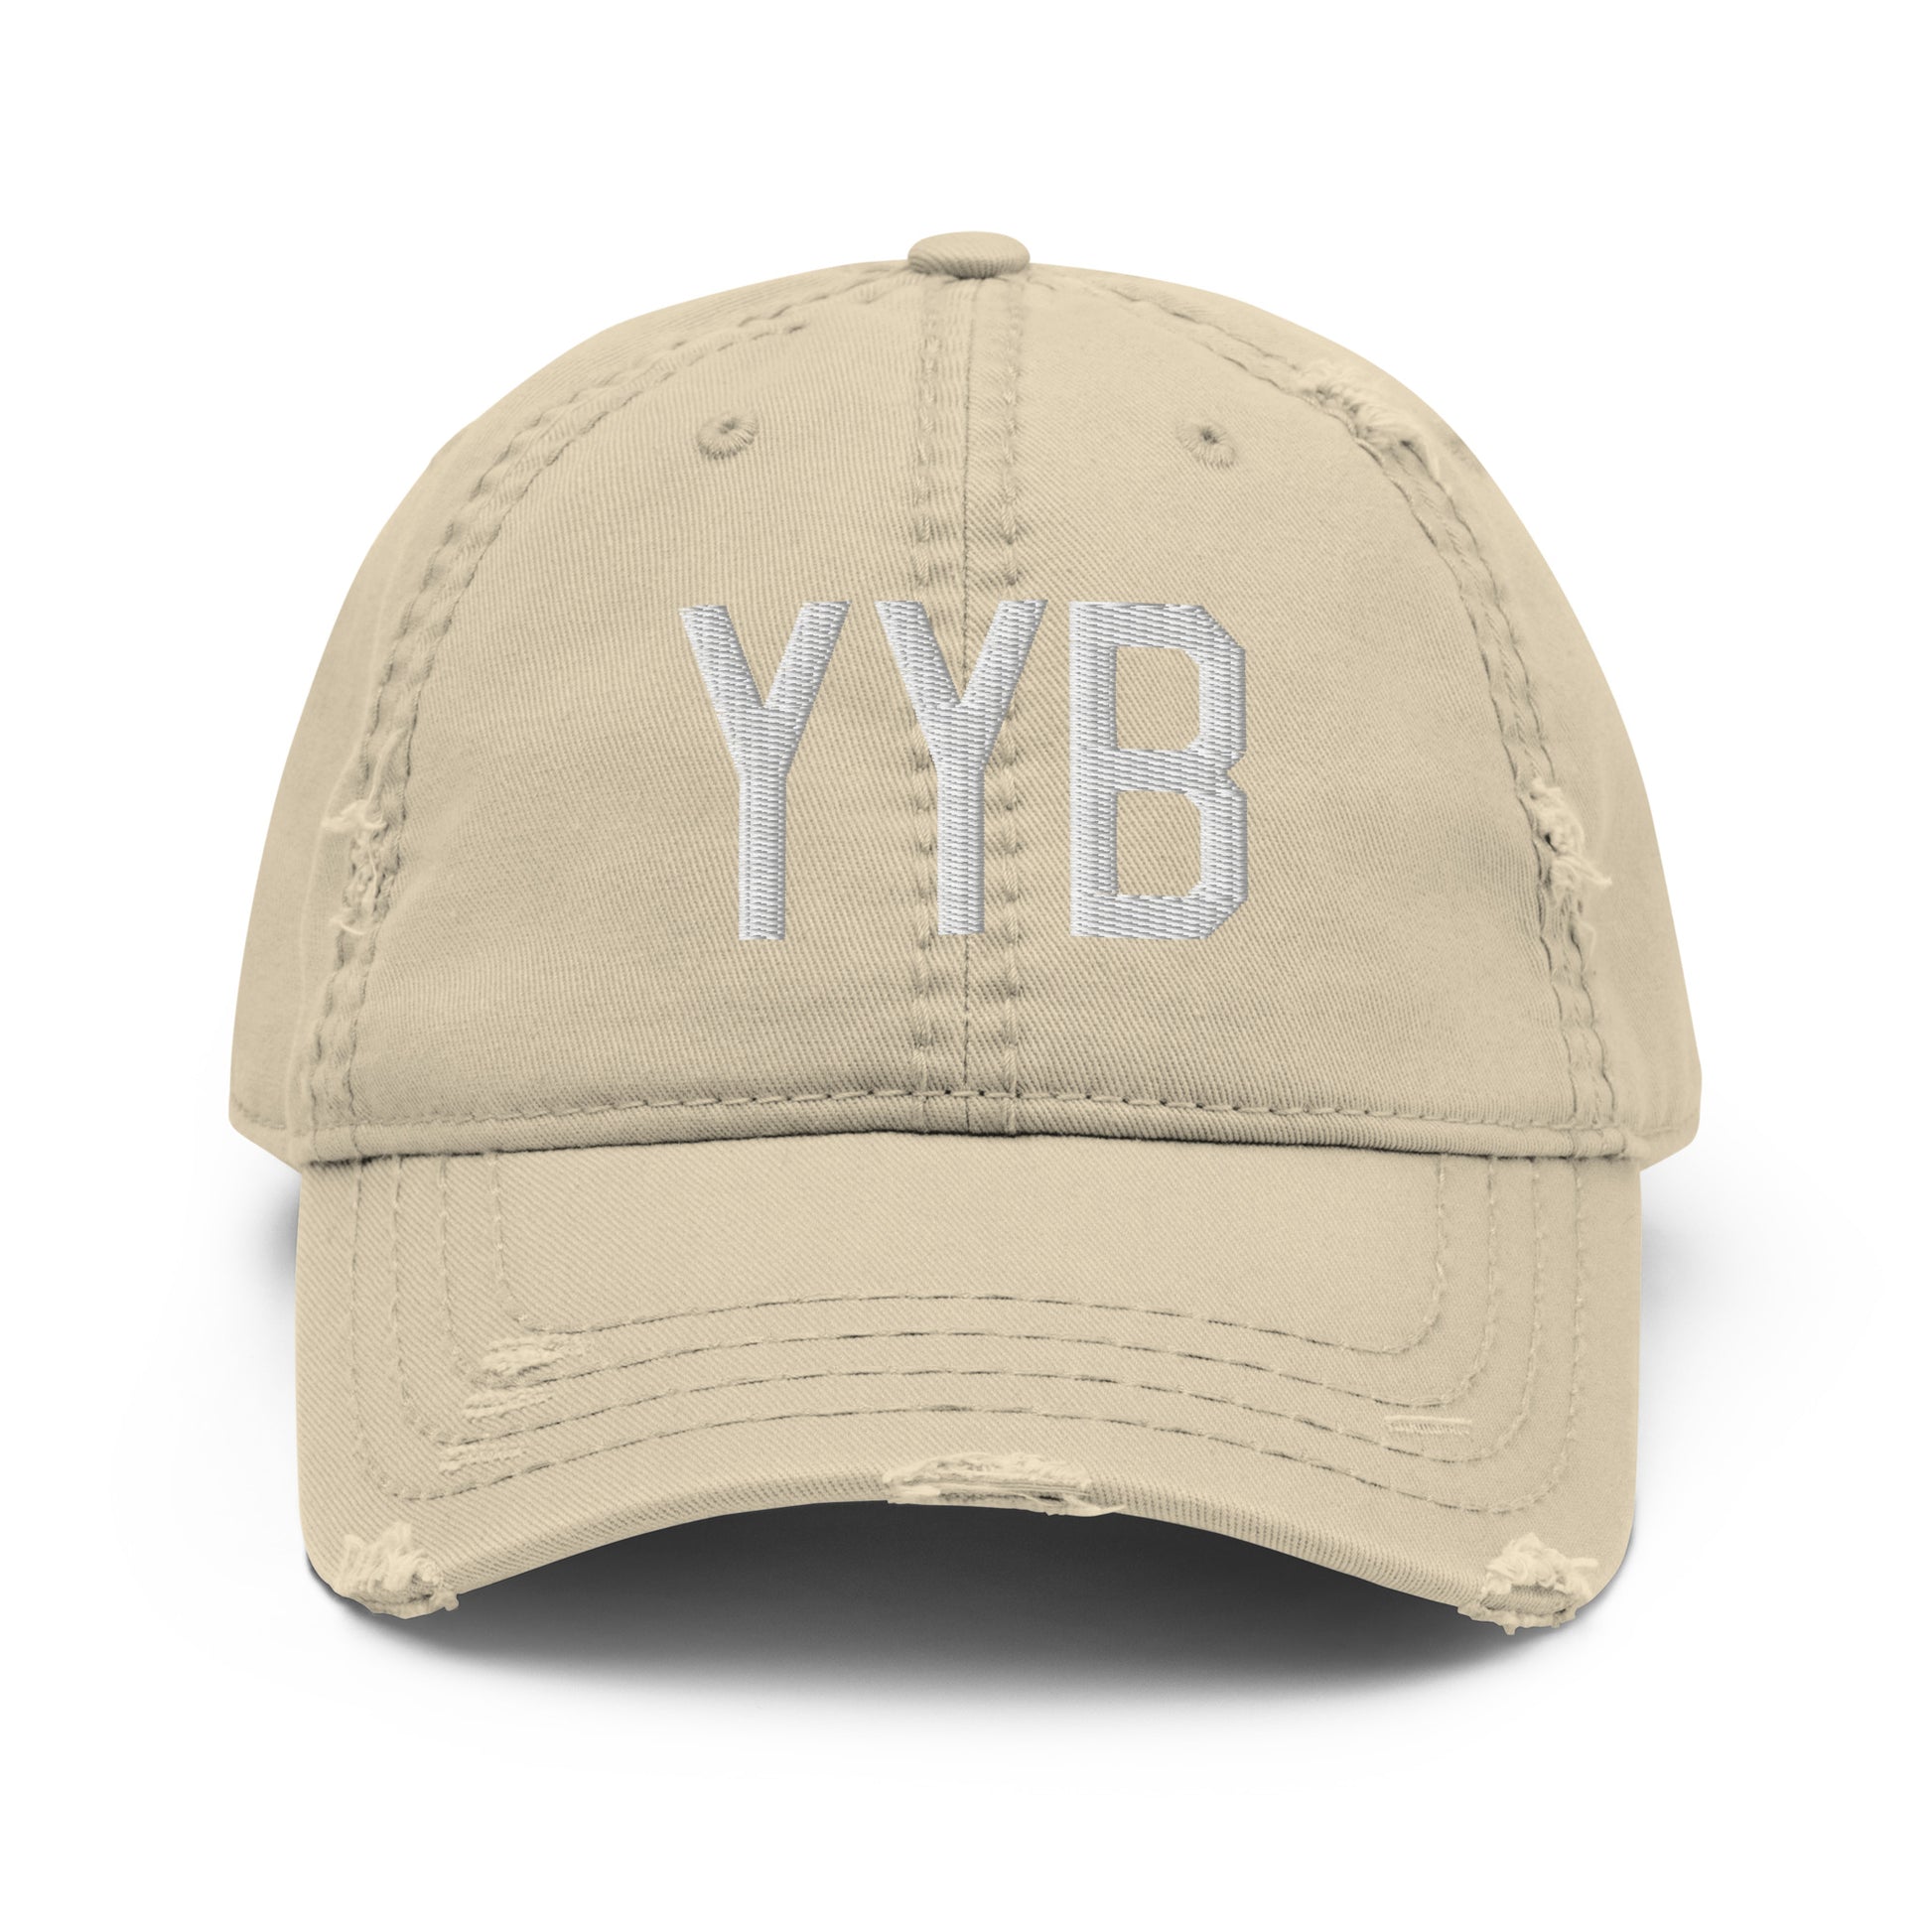 Airport Code Distressed Hat - White • YYB North Bay • YHM Designs - Image 18